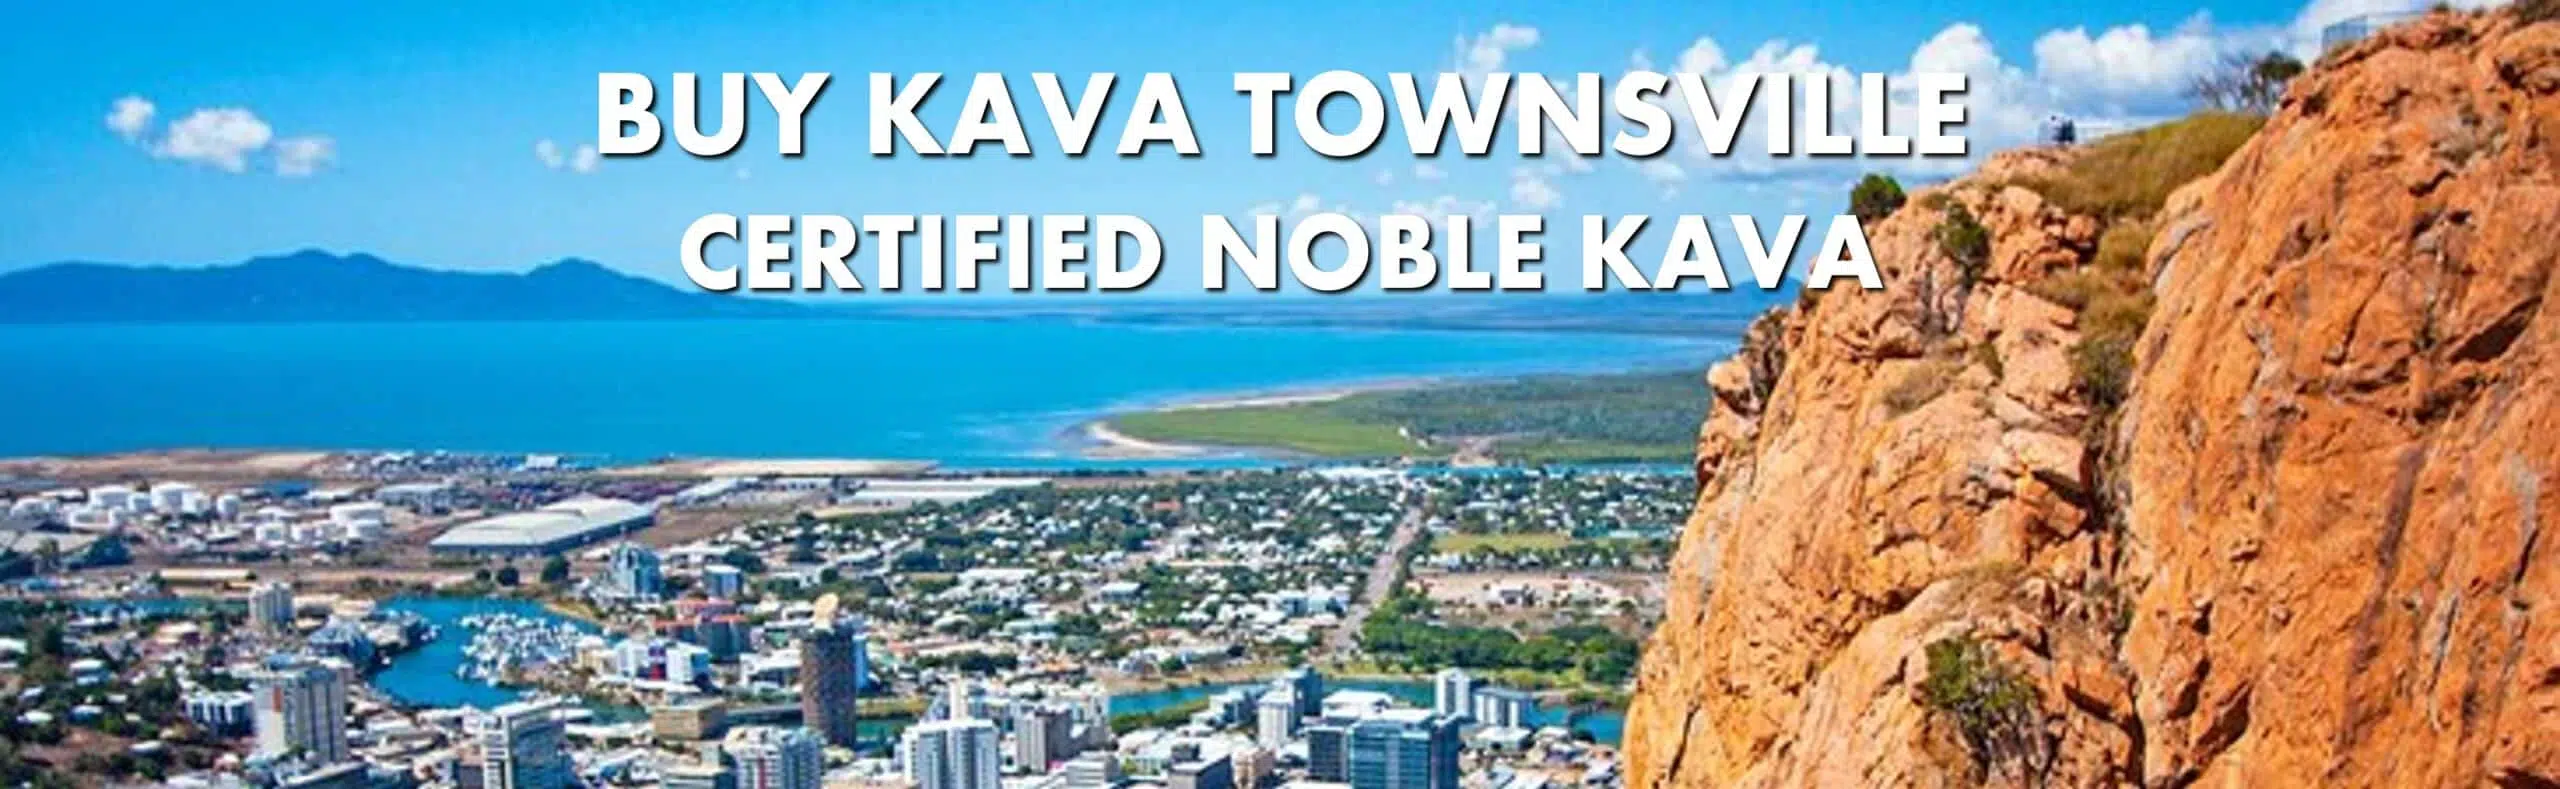 Castle Hill Lookout Townsville Queensland with caption Buy Kava Townsville Certified Noble Kava